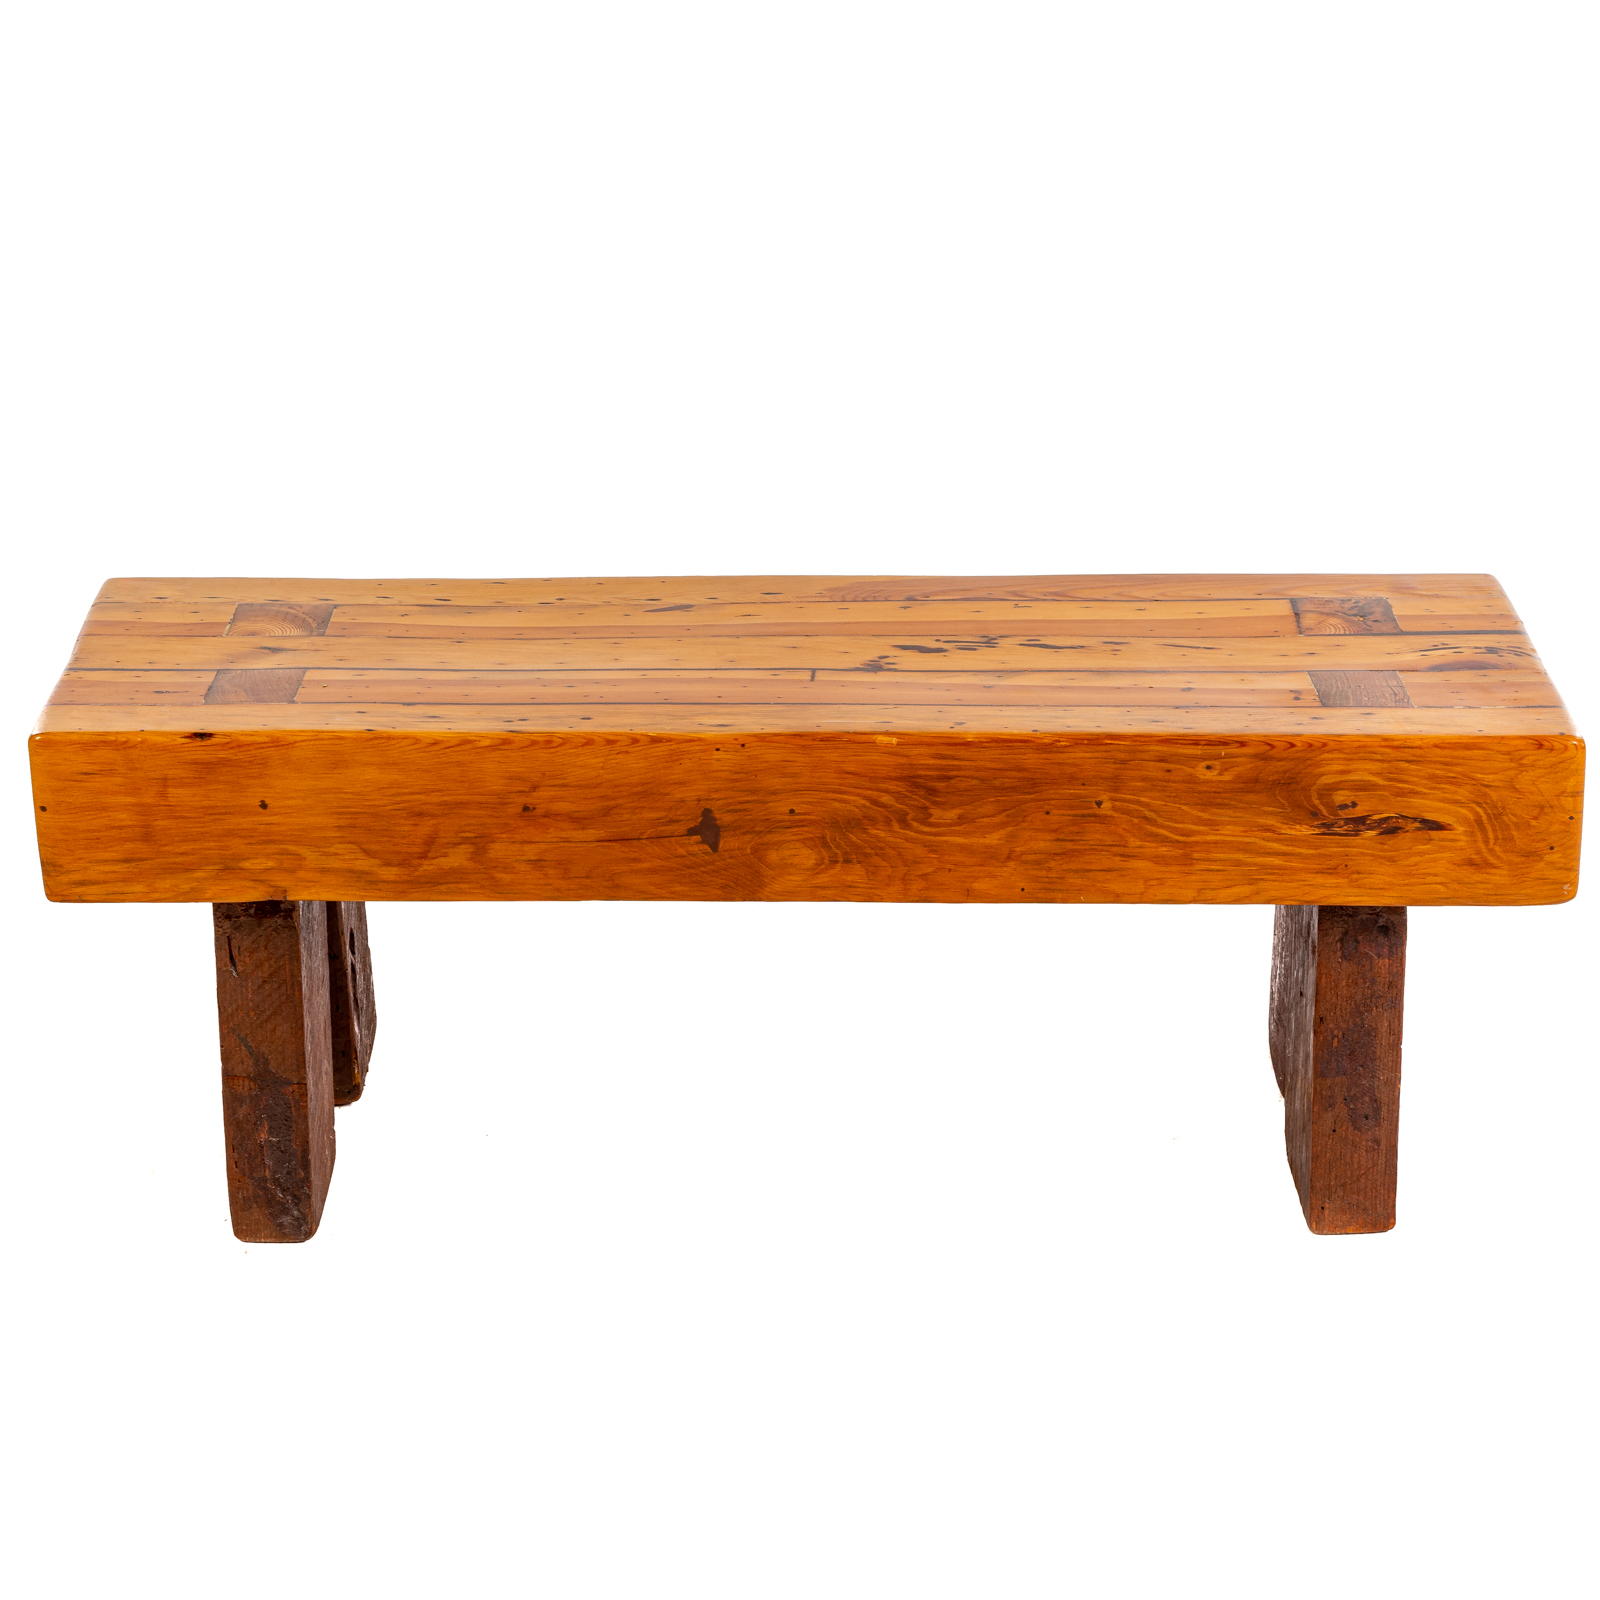 CUSTOM RECYCLED WOOD BEAM BENCH 33878a